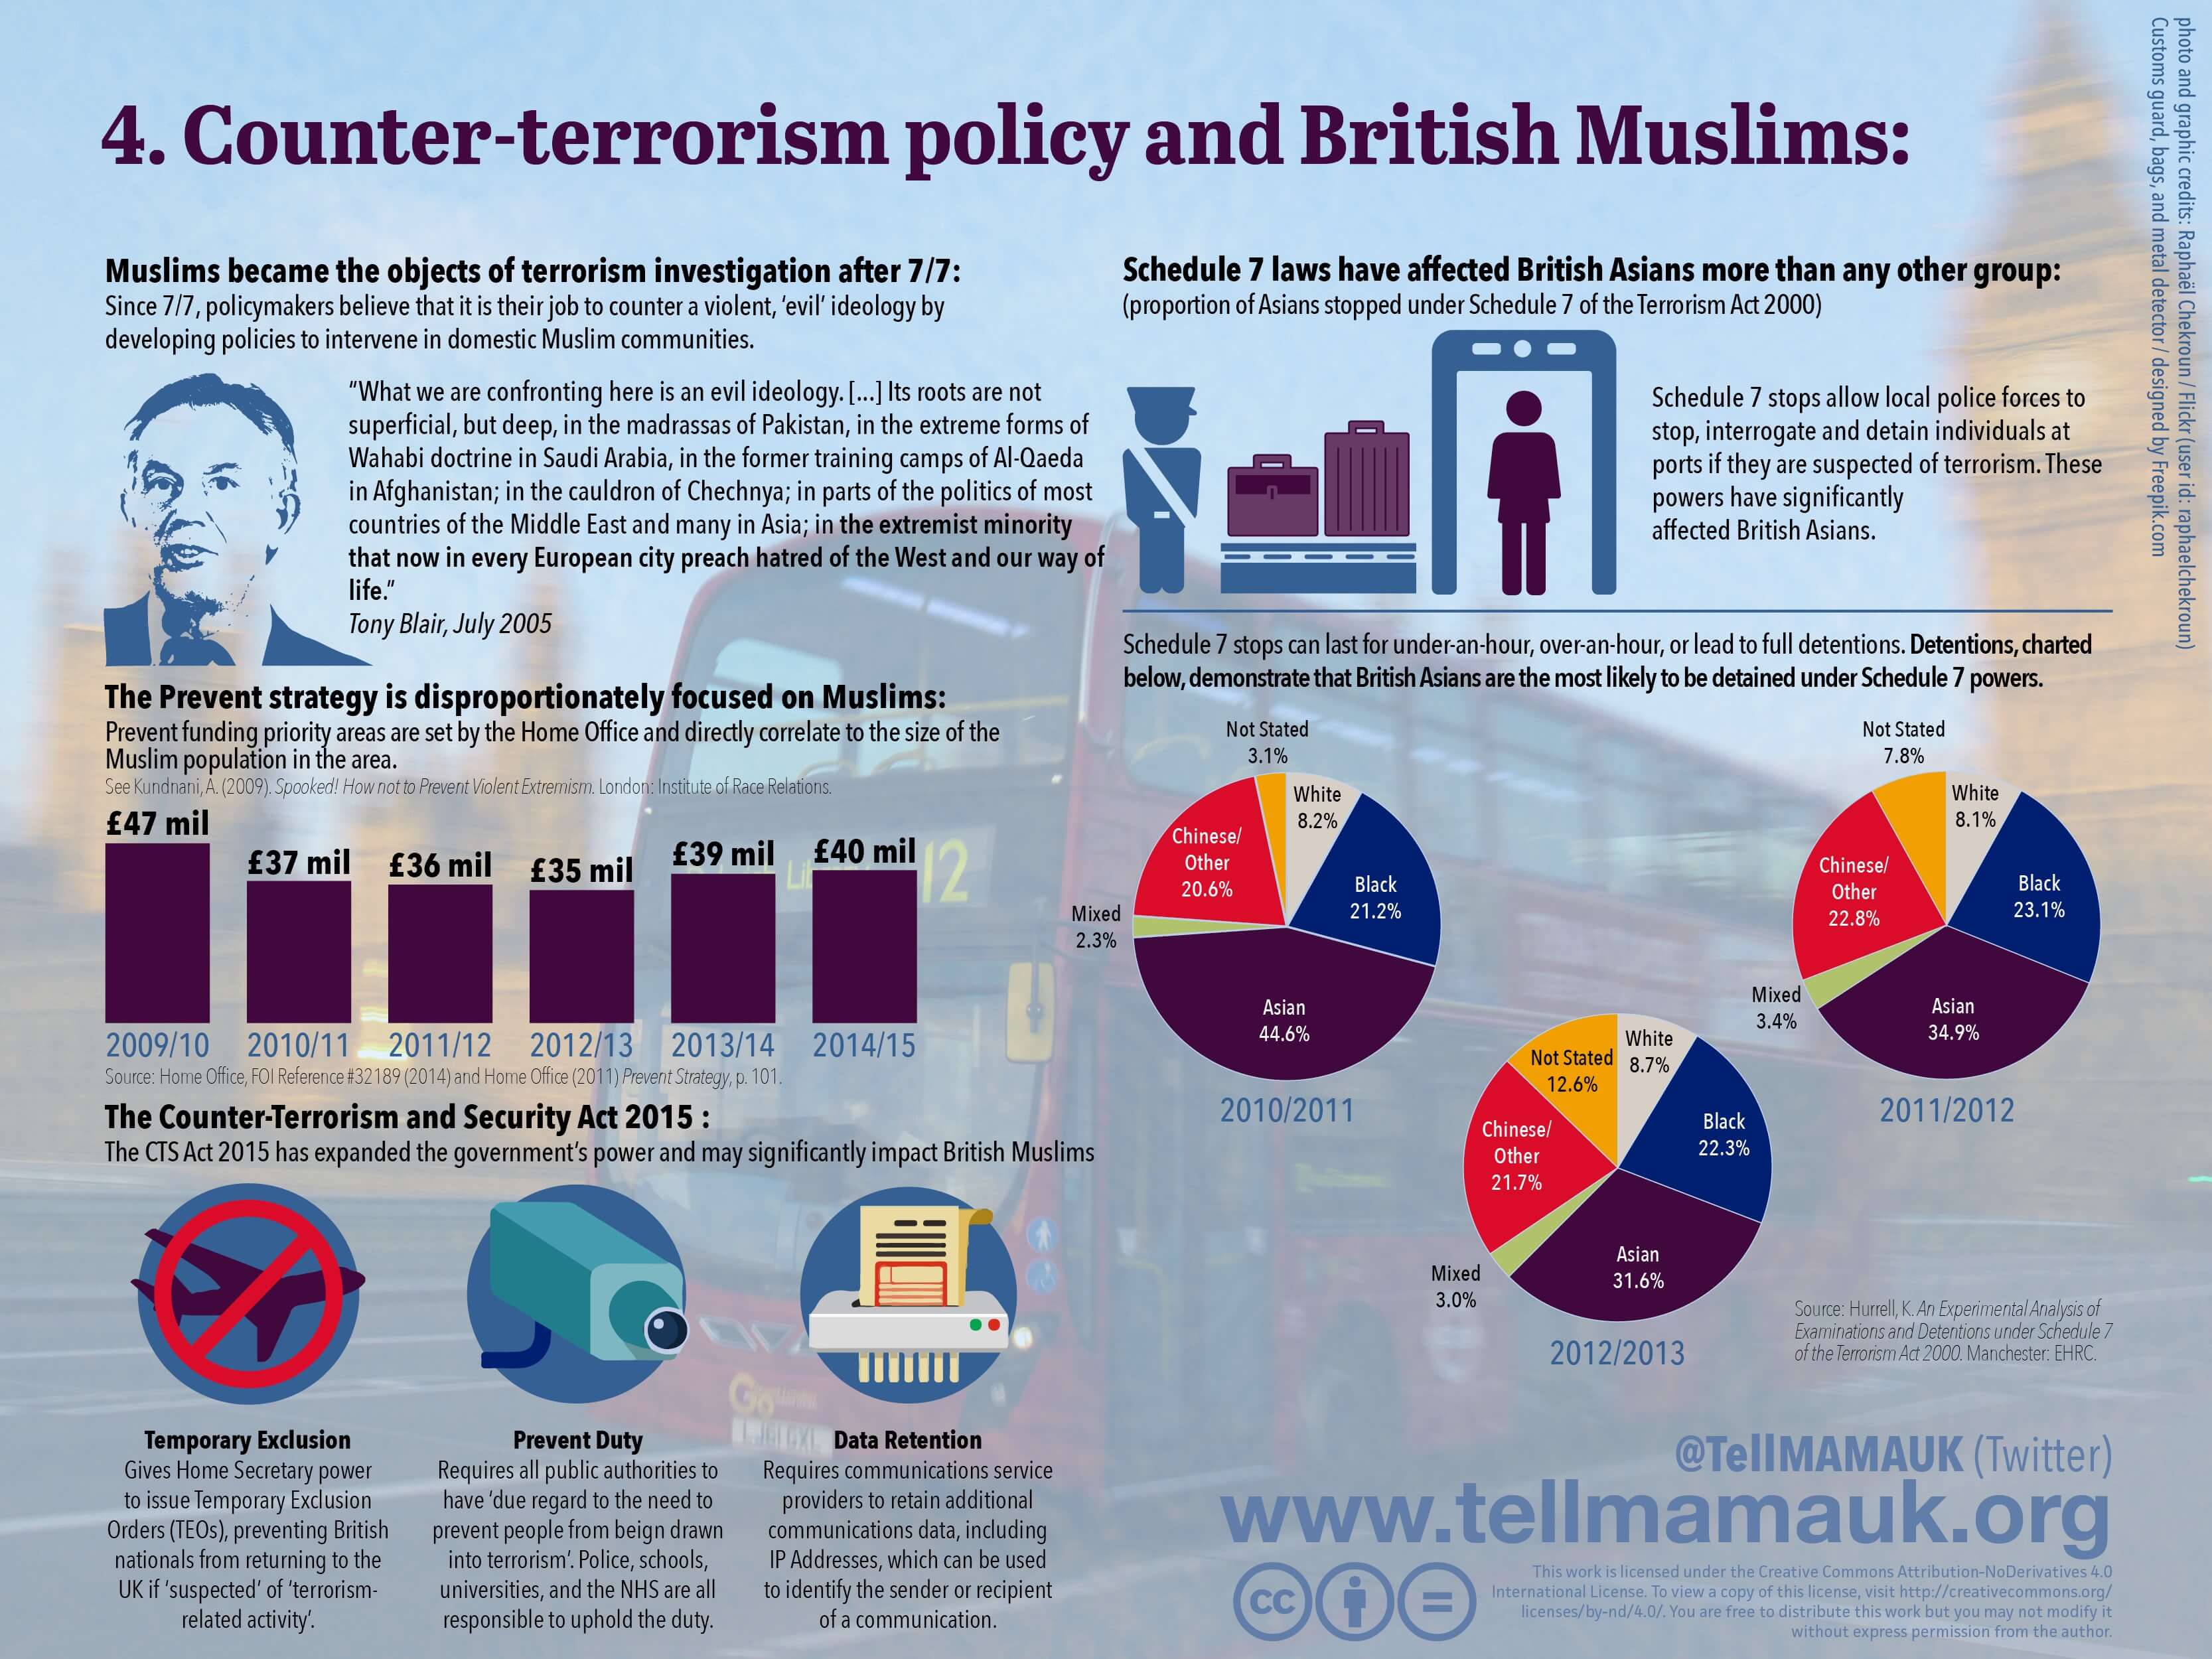 Counter-terrorism policy disproportionately affects British Muslims